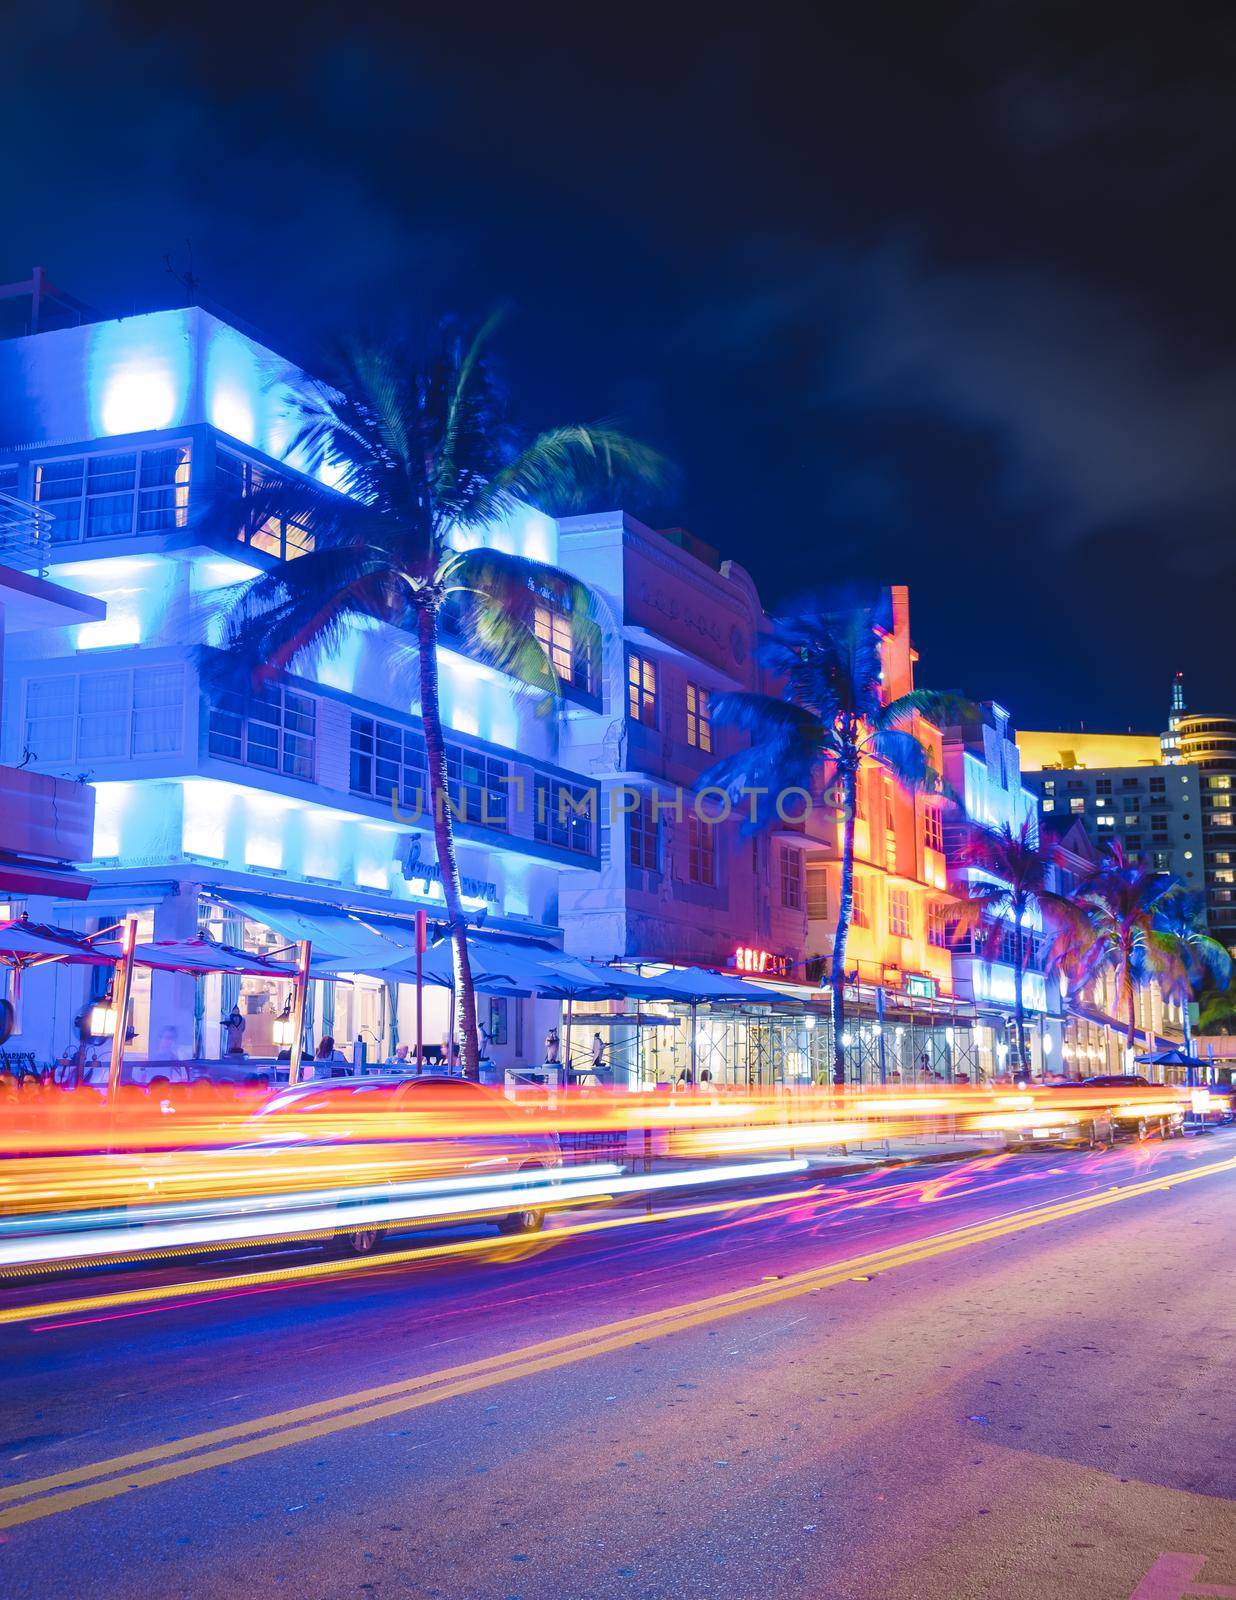 Miami Beach April 2019, colorful Art Deco District at night by fokkebok